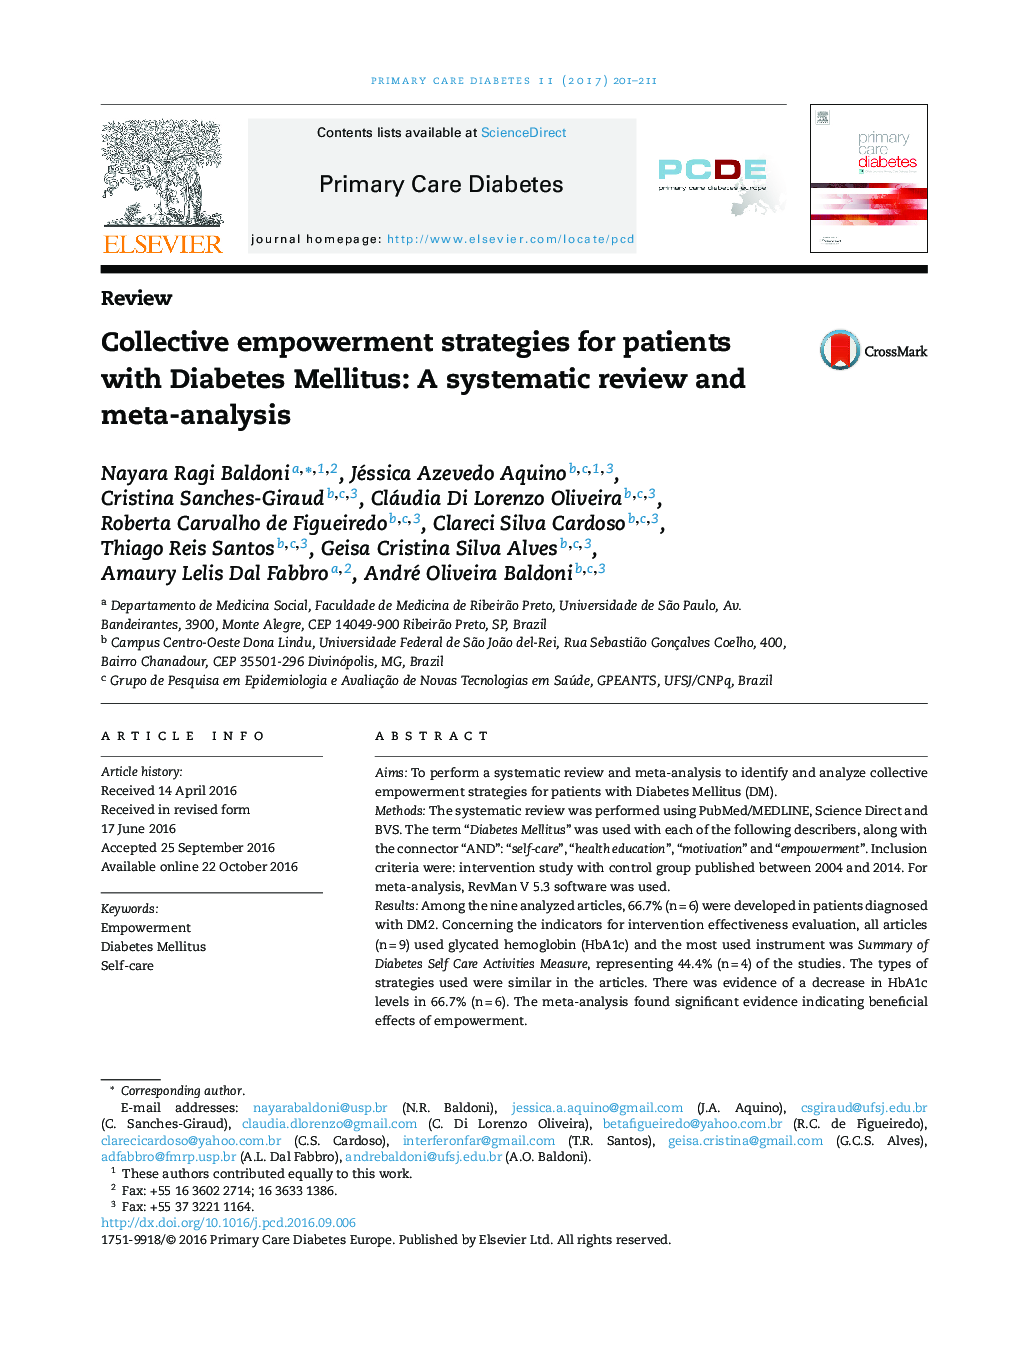 ReviewCollective empowerment strategies for patients with Diabetes Mellitus: A systematic review and meta-analysis